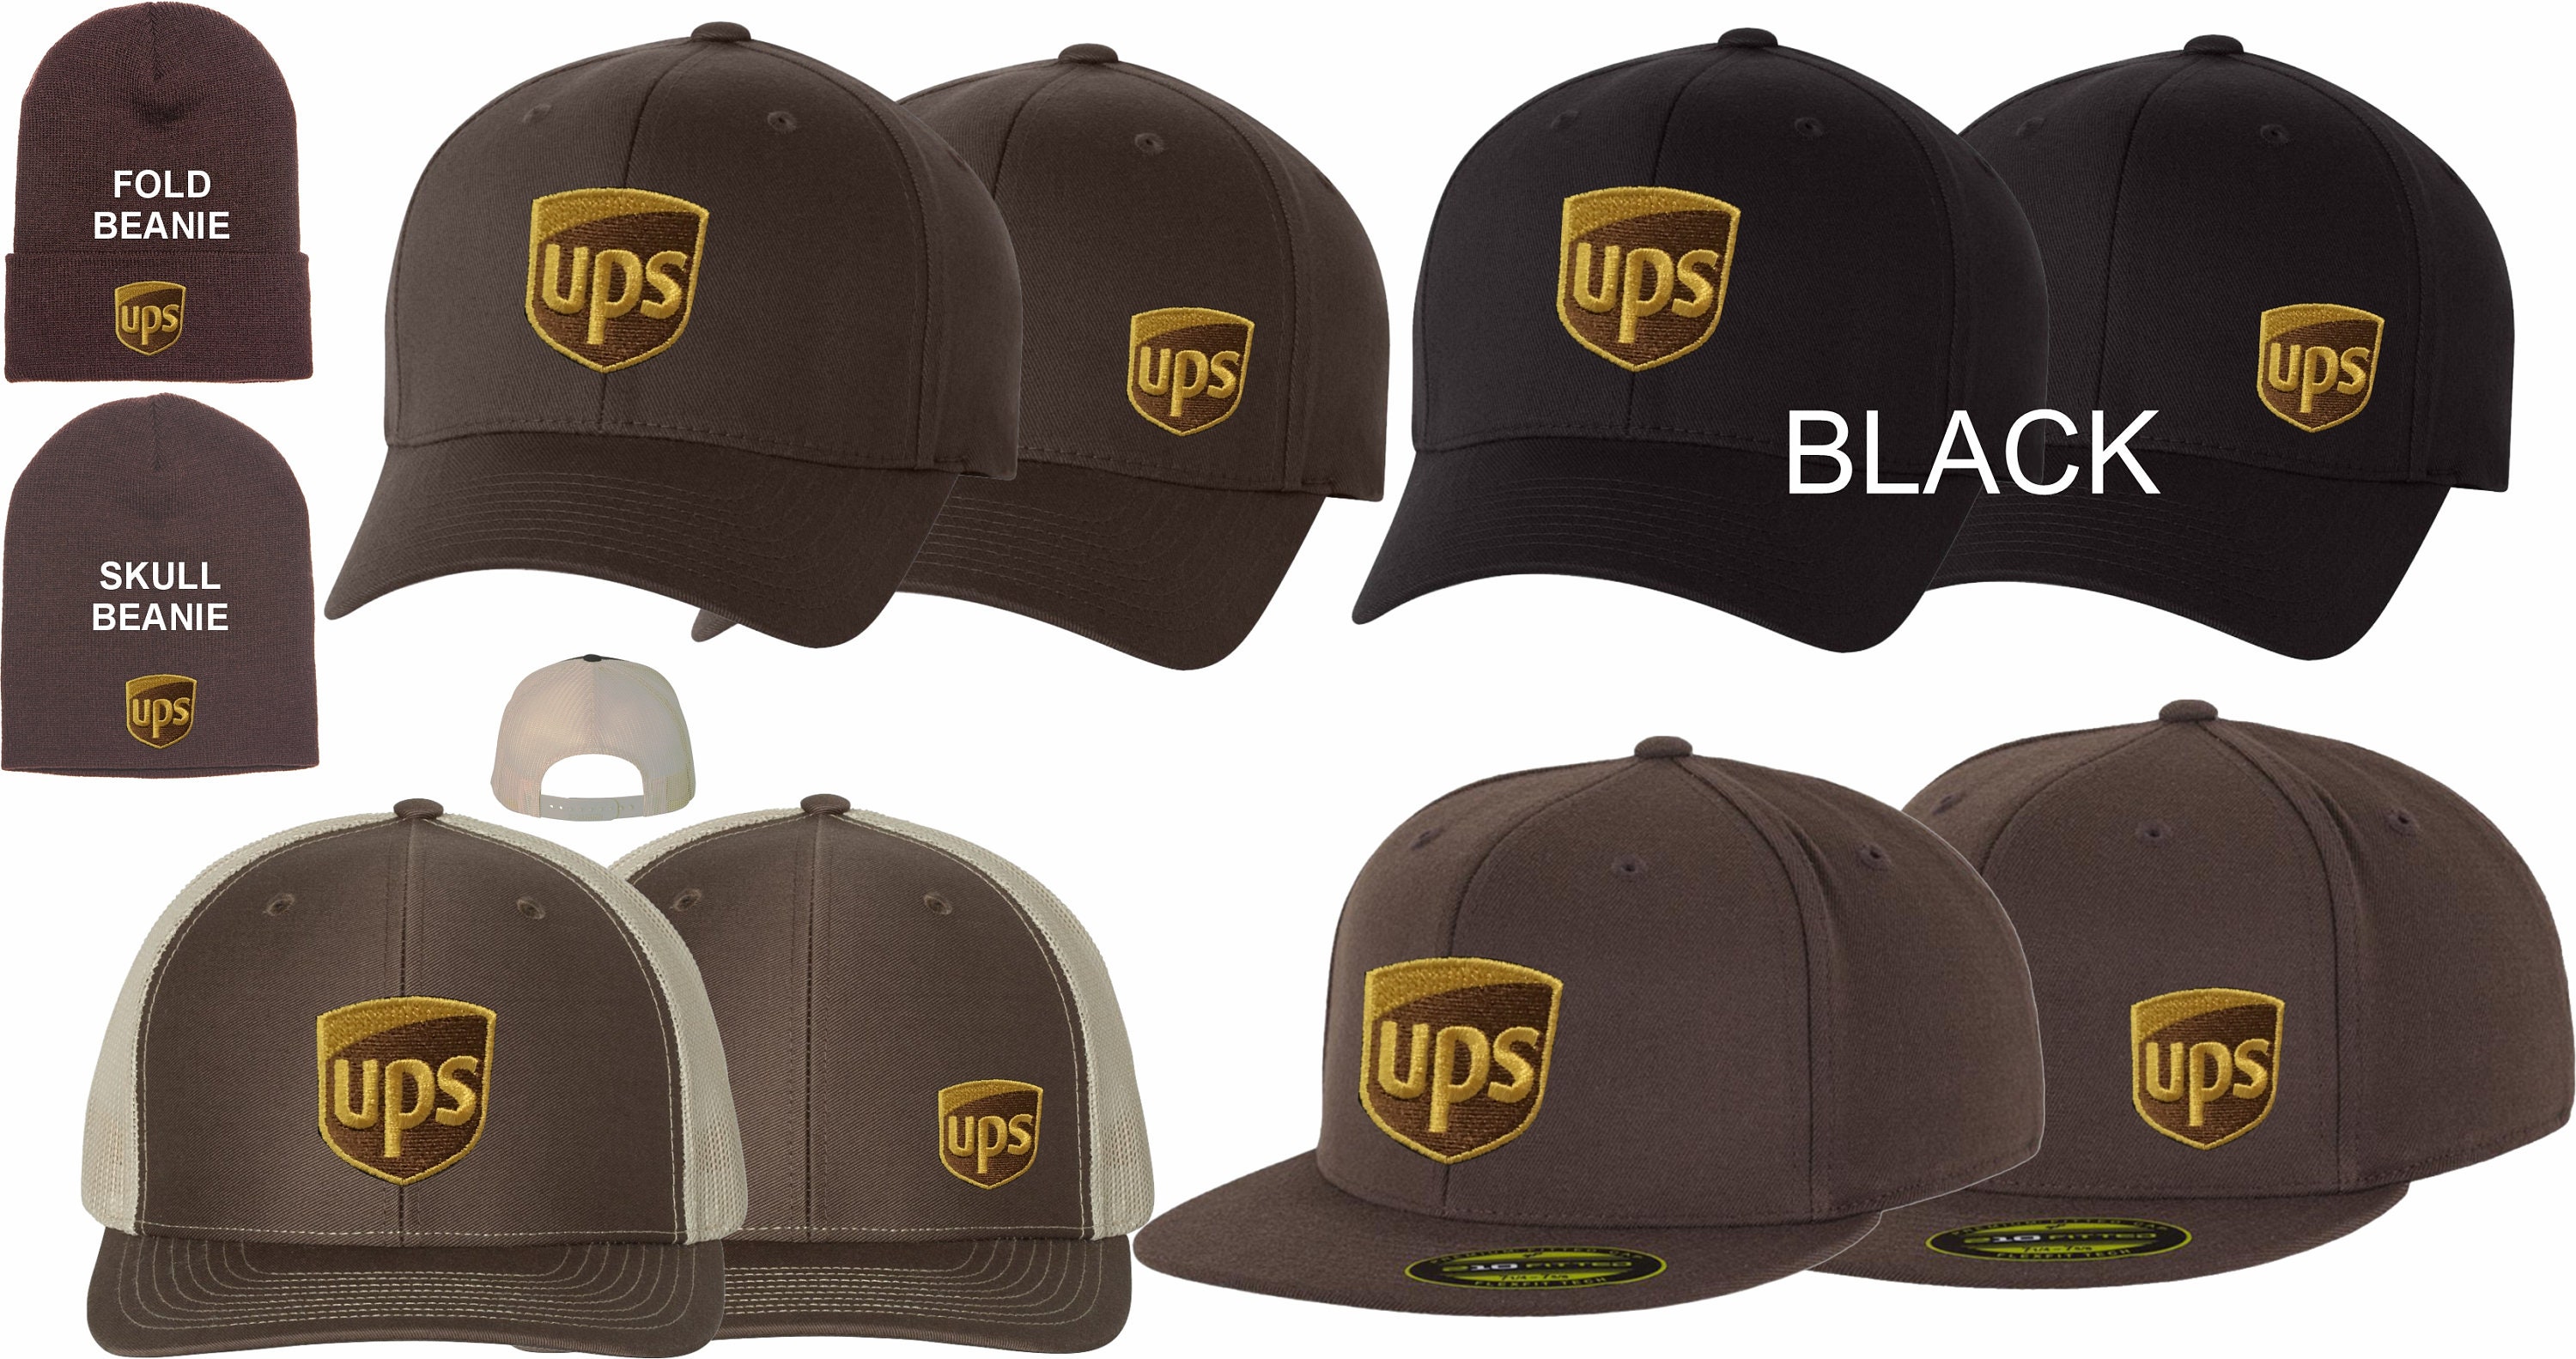 Custom UPS Hats Caps 112 Richardson Flex Fit 210 Flat Bill 6277 Curved & 3d  Puff Free Domestic Shipping Free Personalized - Etsy